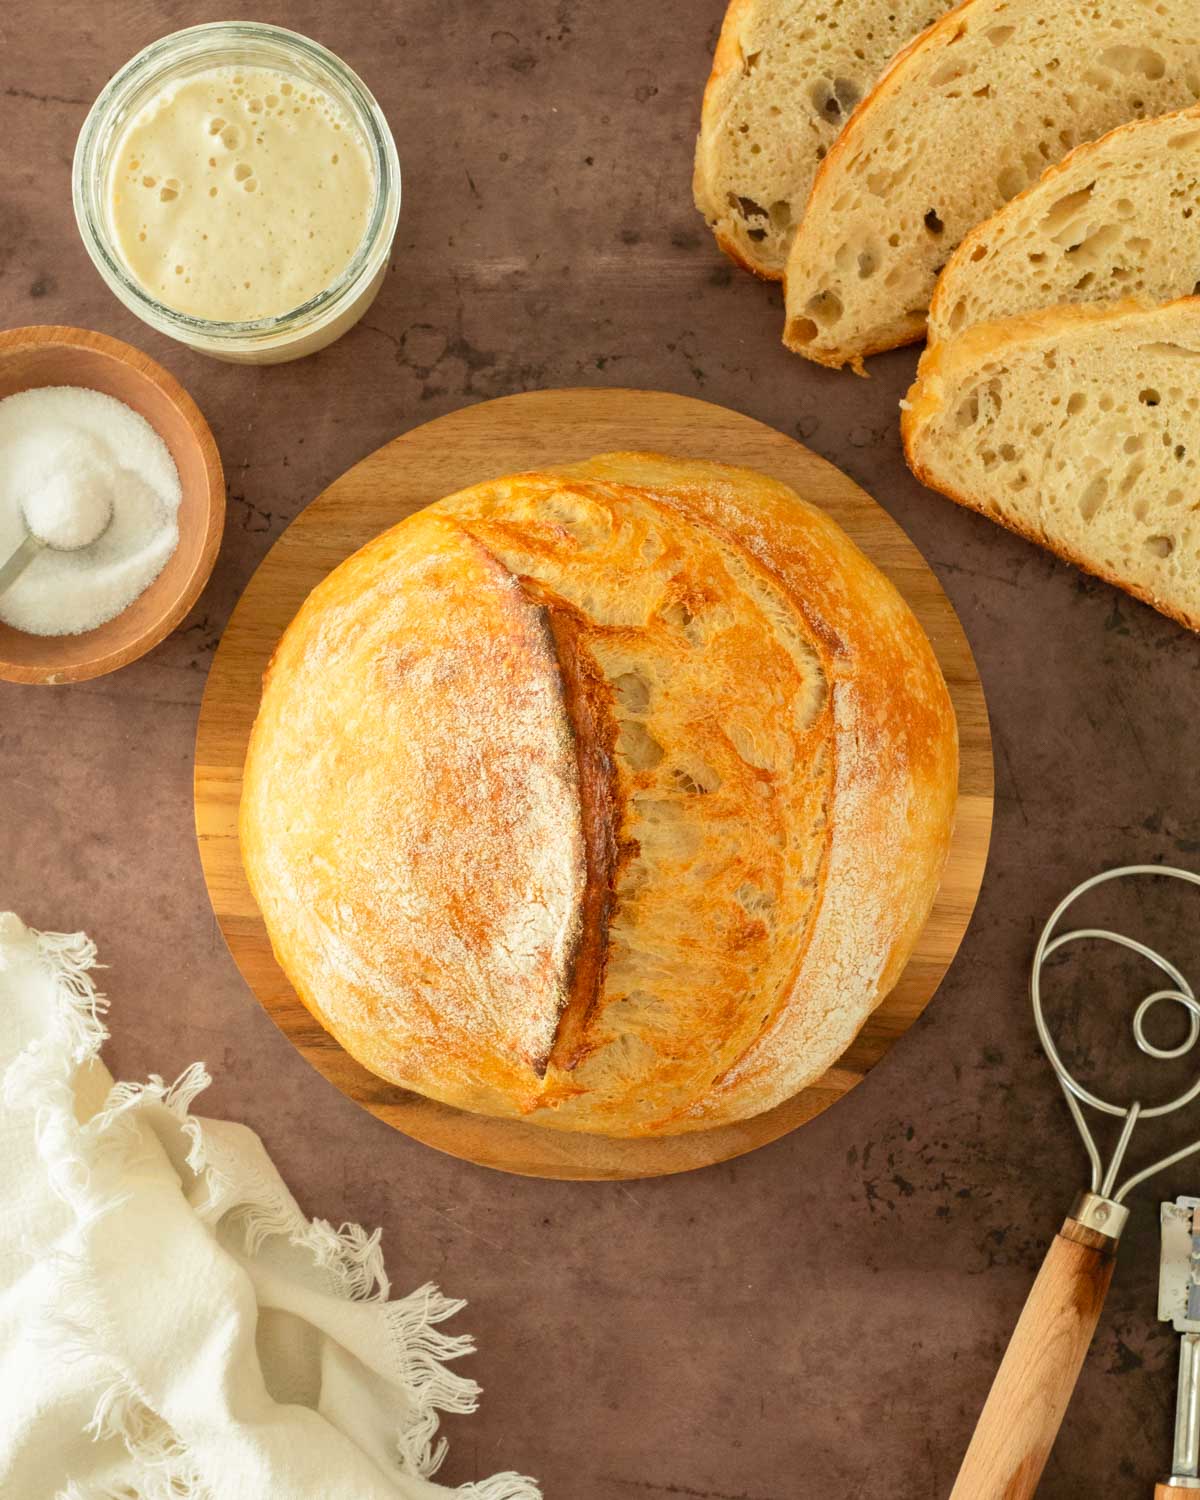 A Guide to Homemade Bread Baking